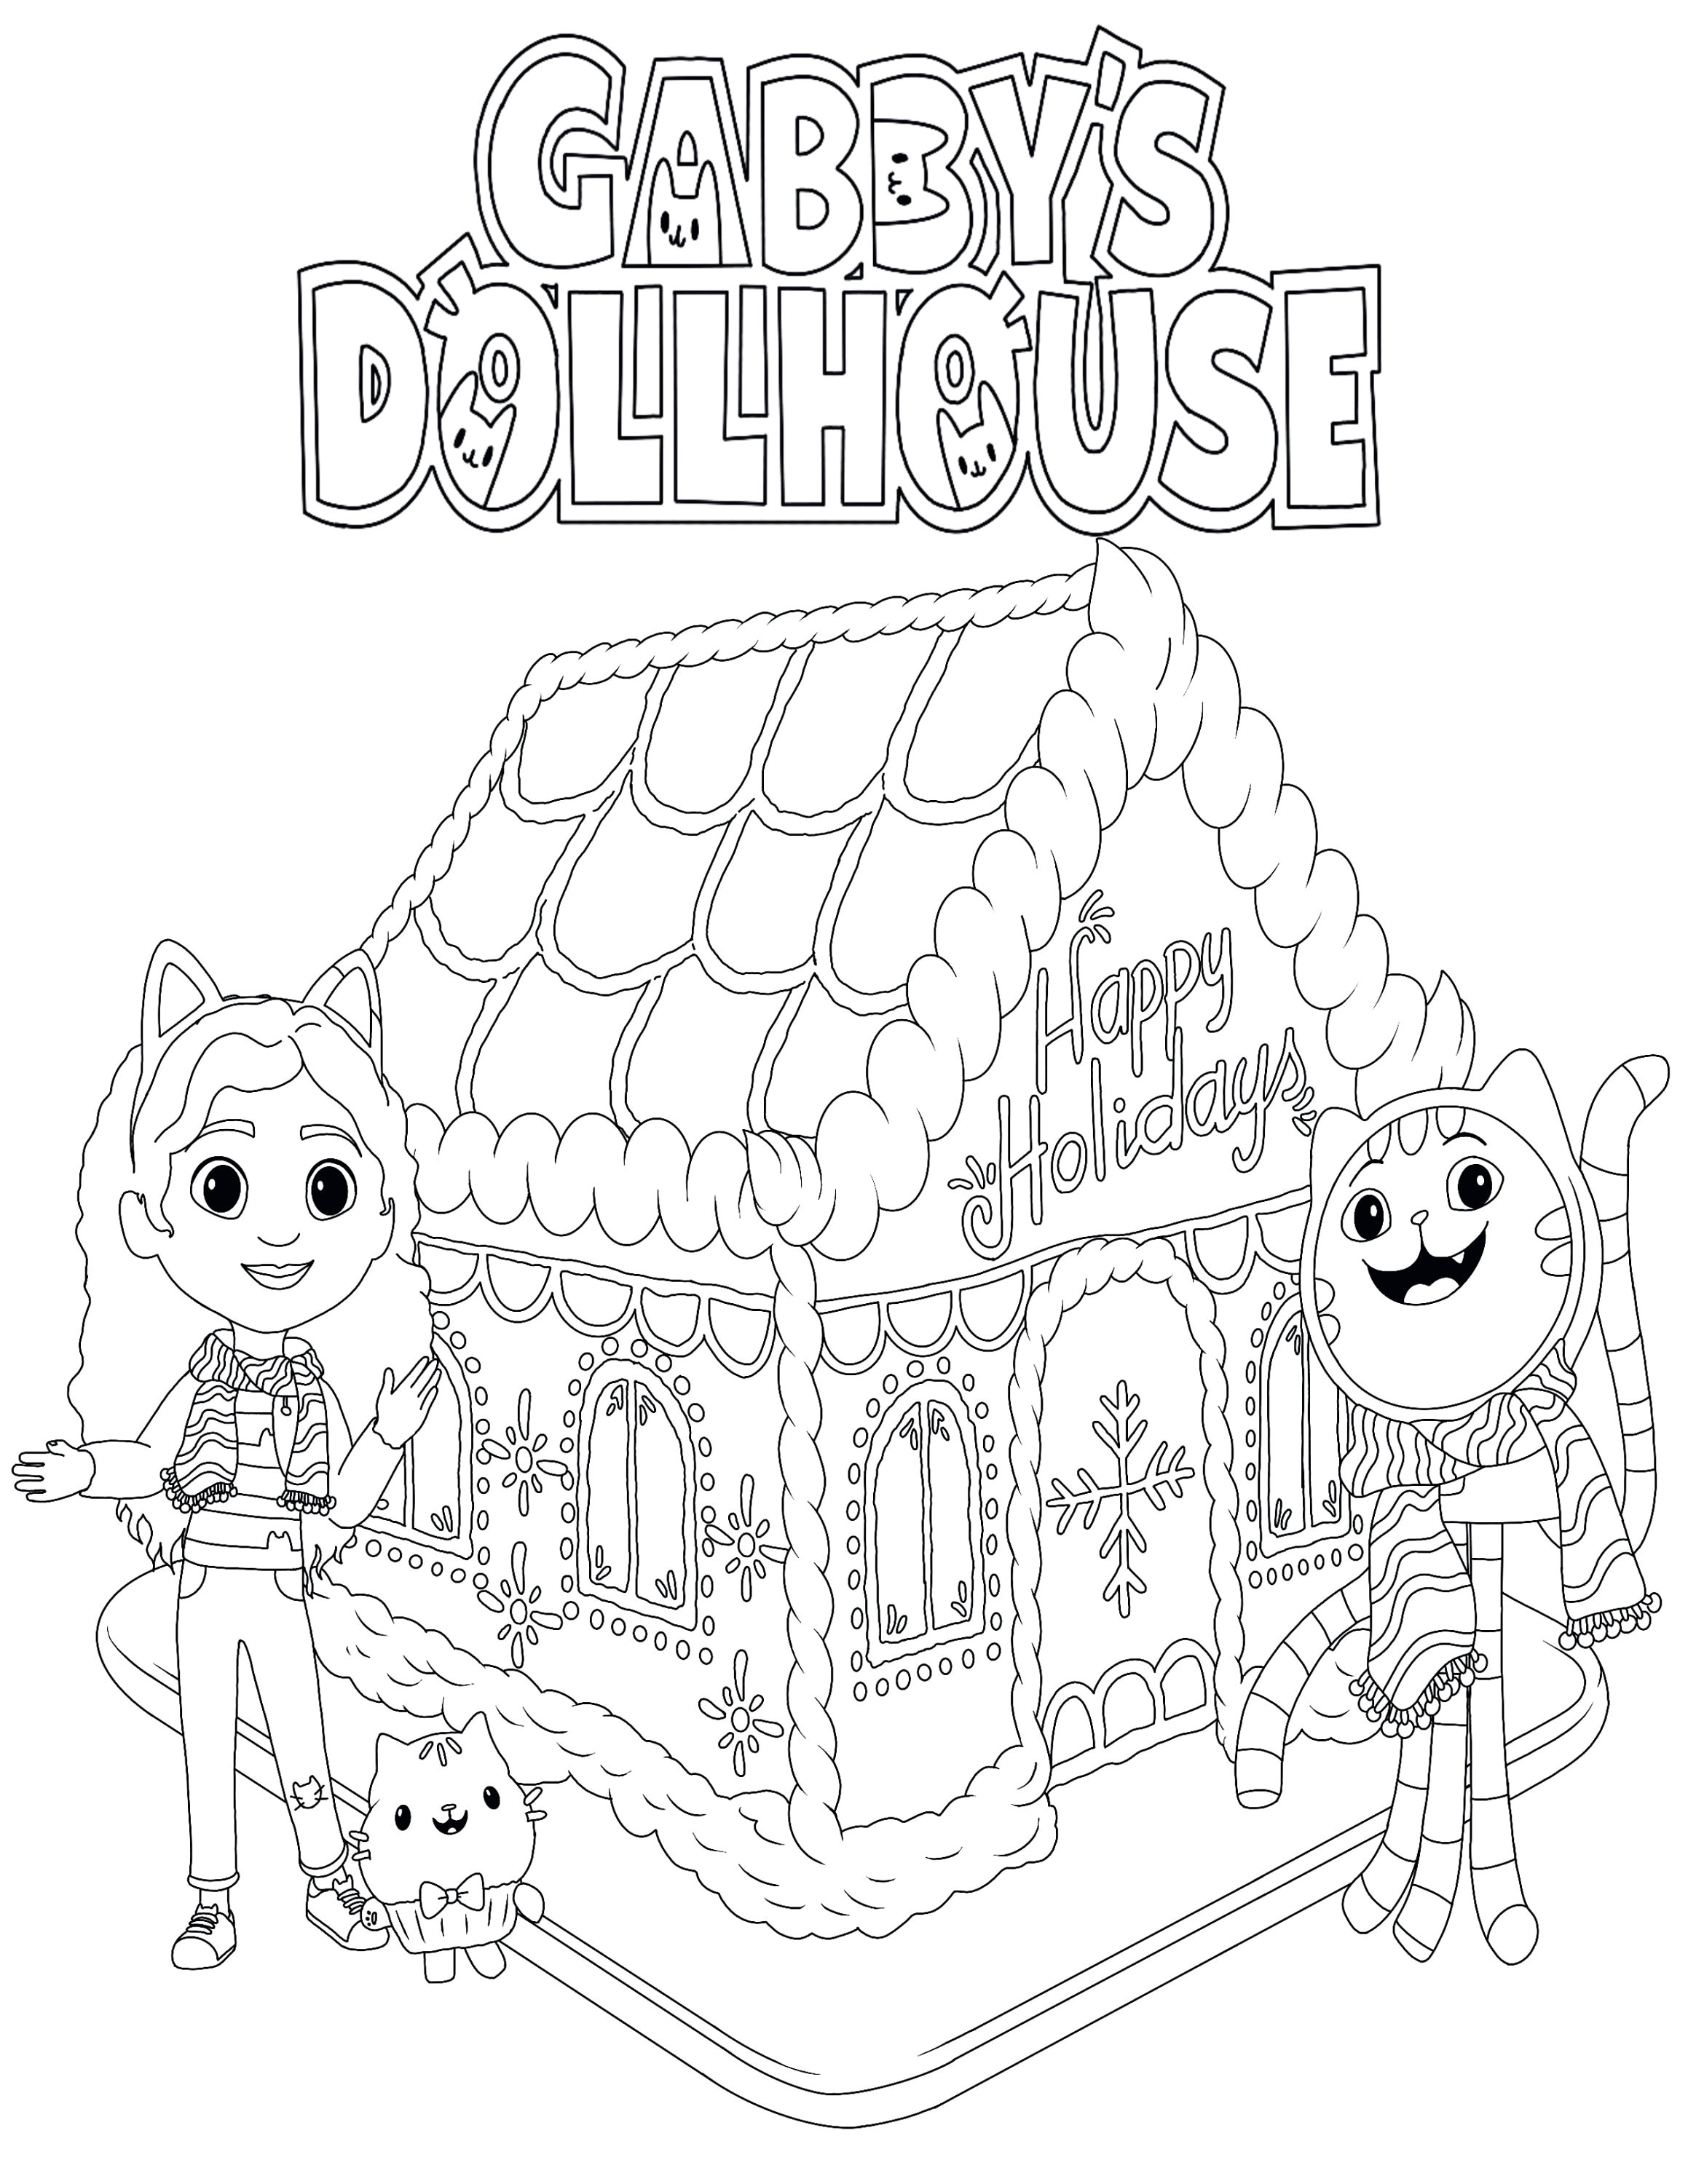 Five pack of kids coloring sheets gabbys dollhouse and friends